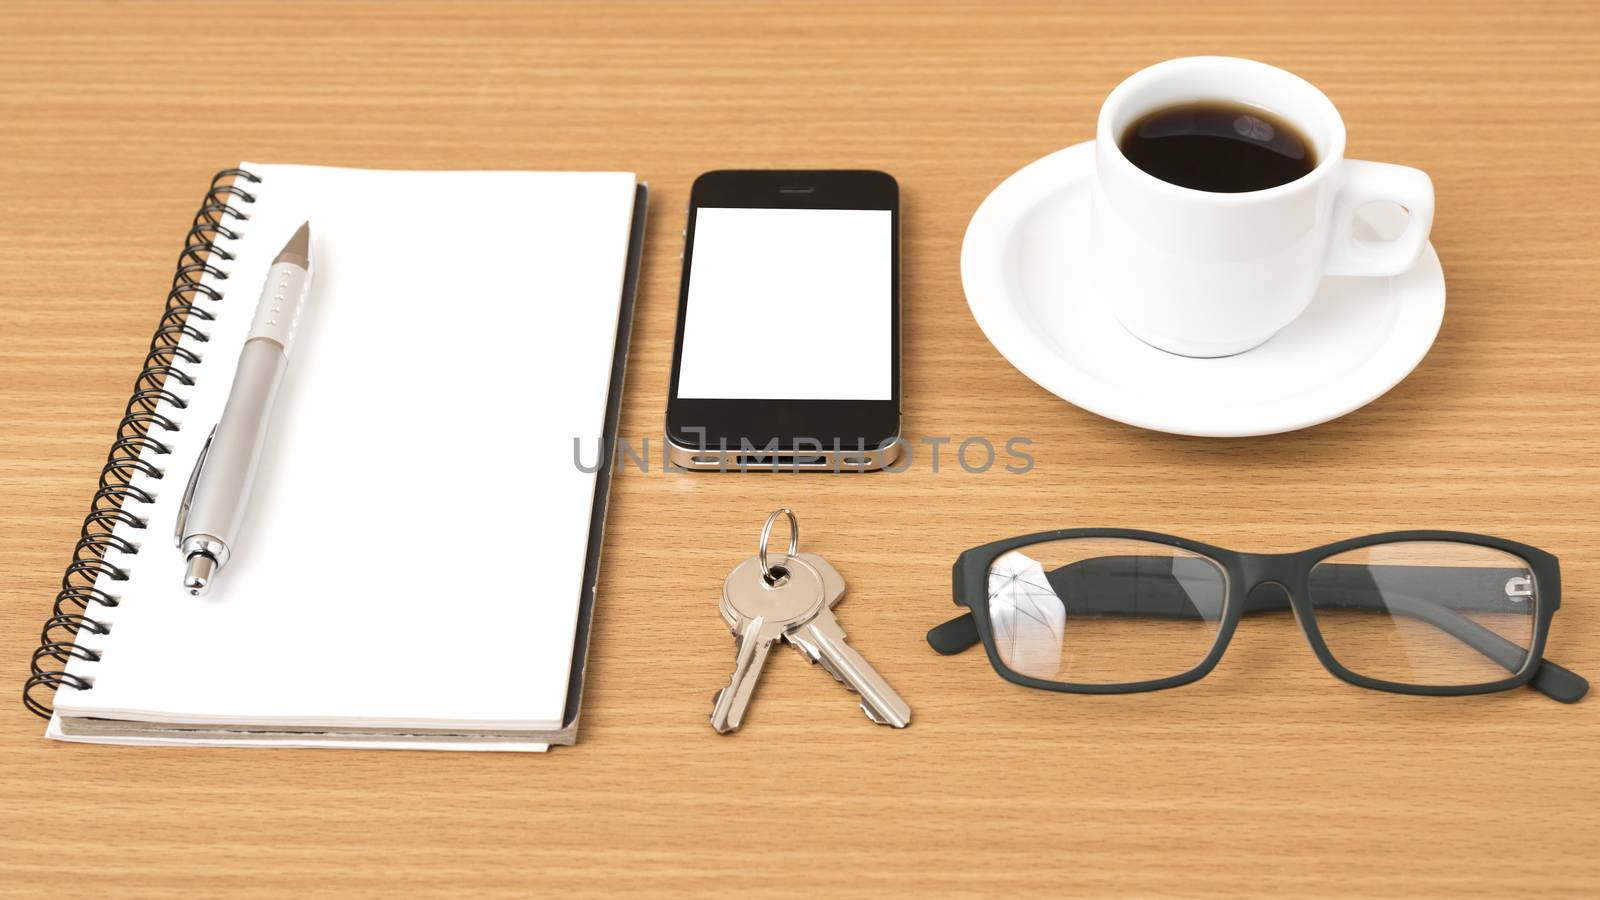 coffee,phone,notepad,eyeglasses and key on wood table background